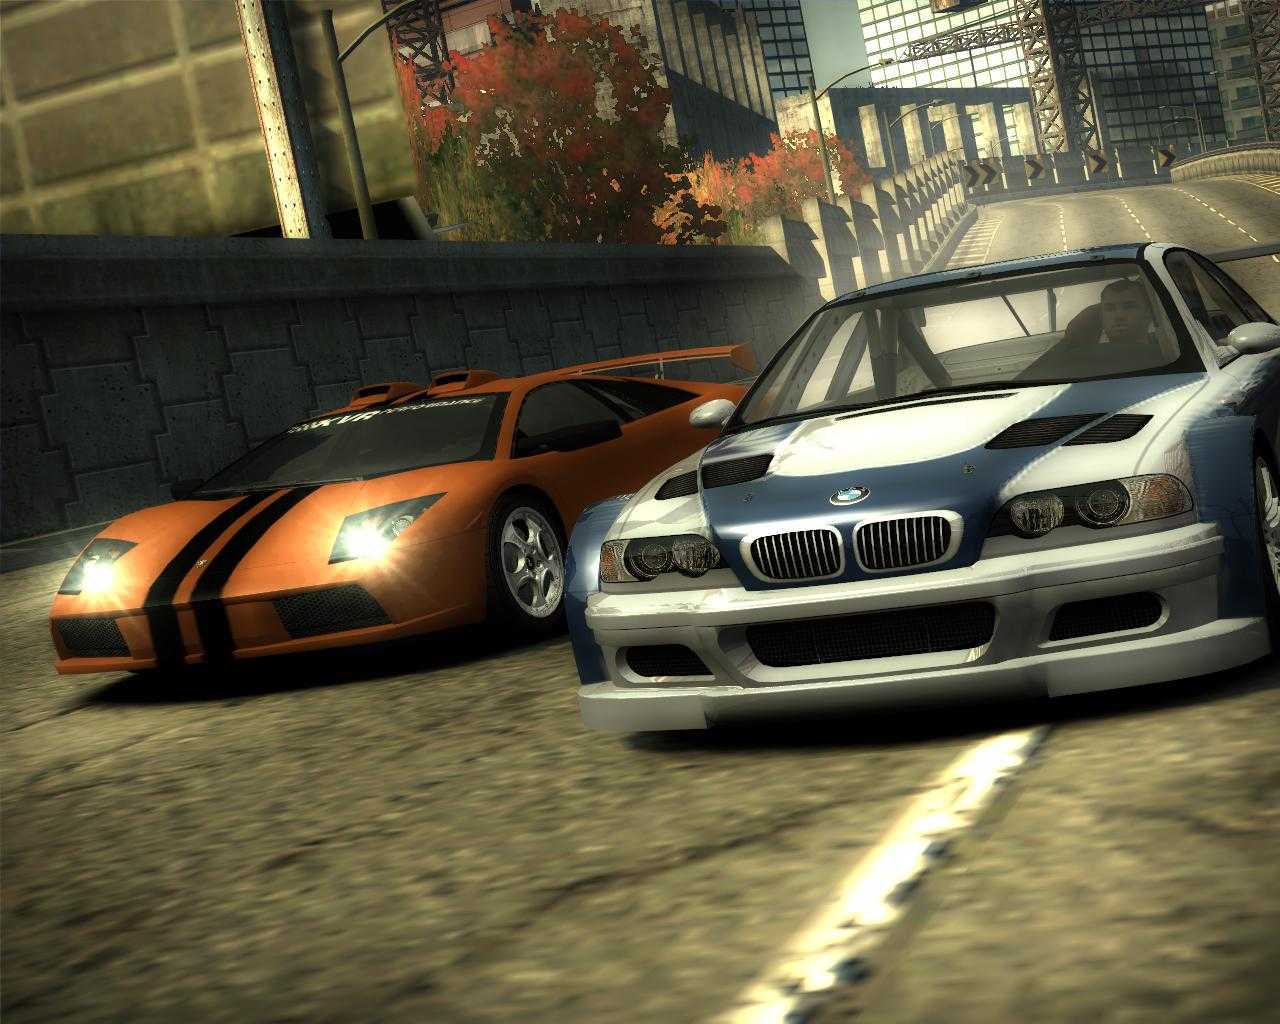 Need for speed wanted game. Нид фор СПИД most wanted 2005. Нфс мост вантед 2005. Гонки NFS most wanted. Need for Speed MW 2005.